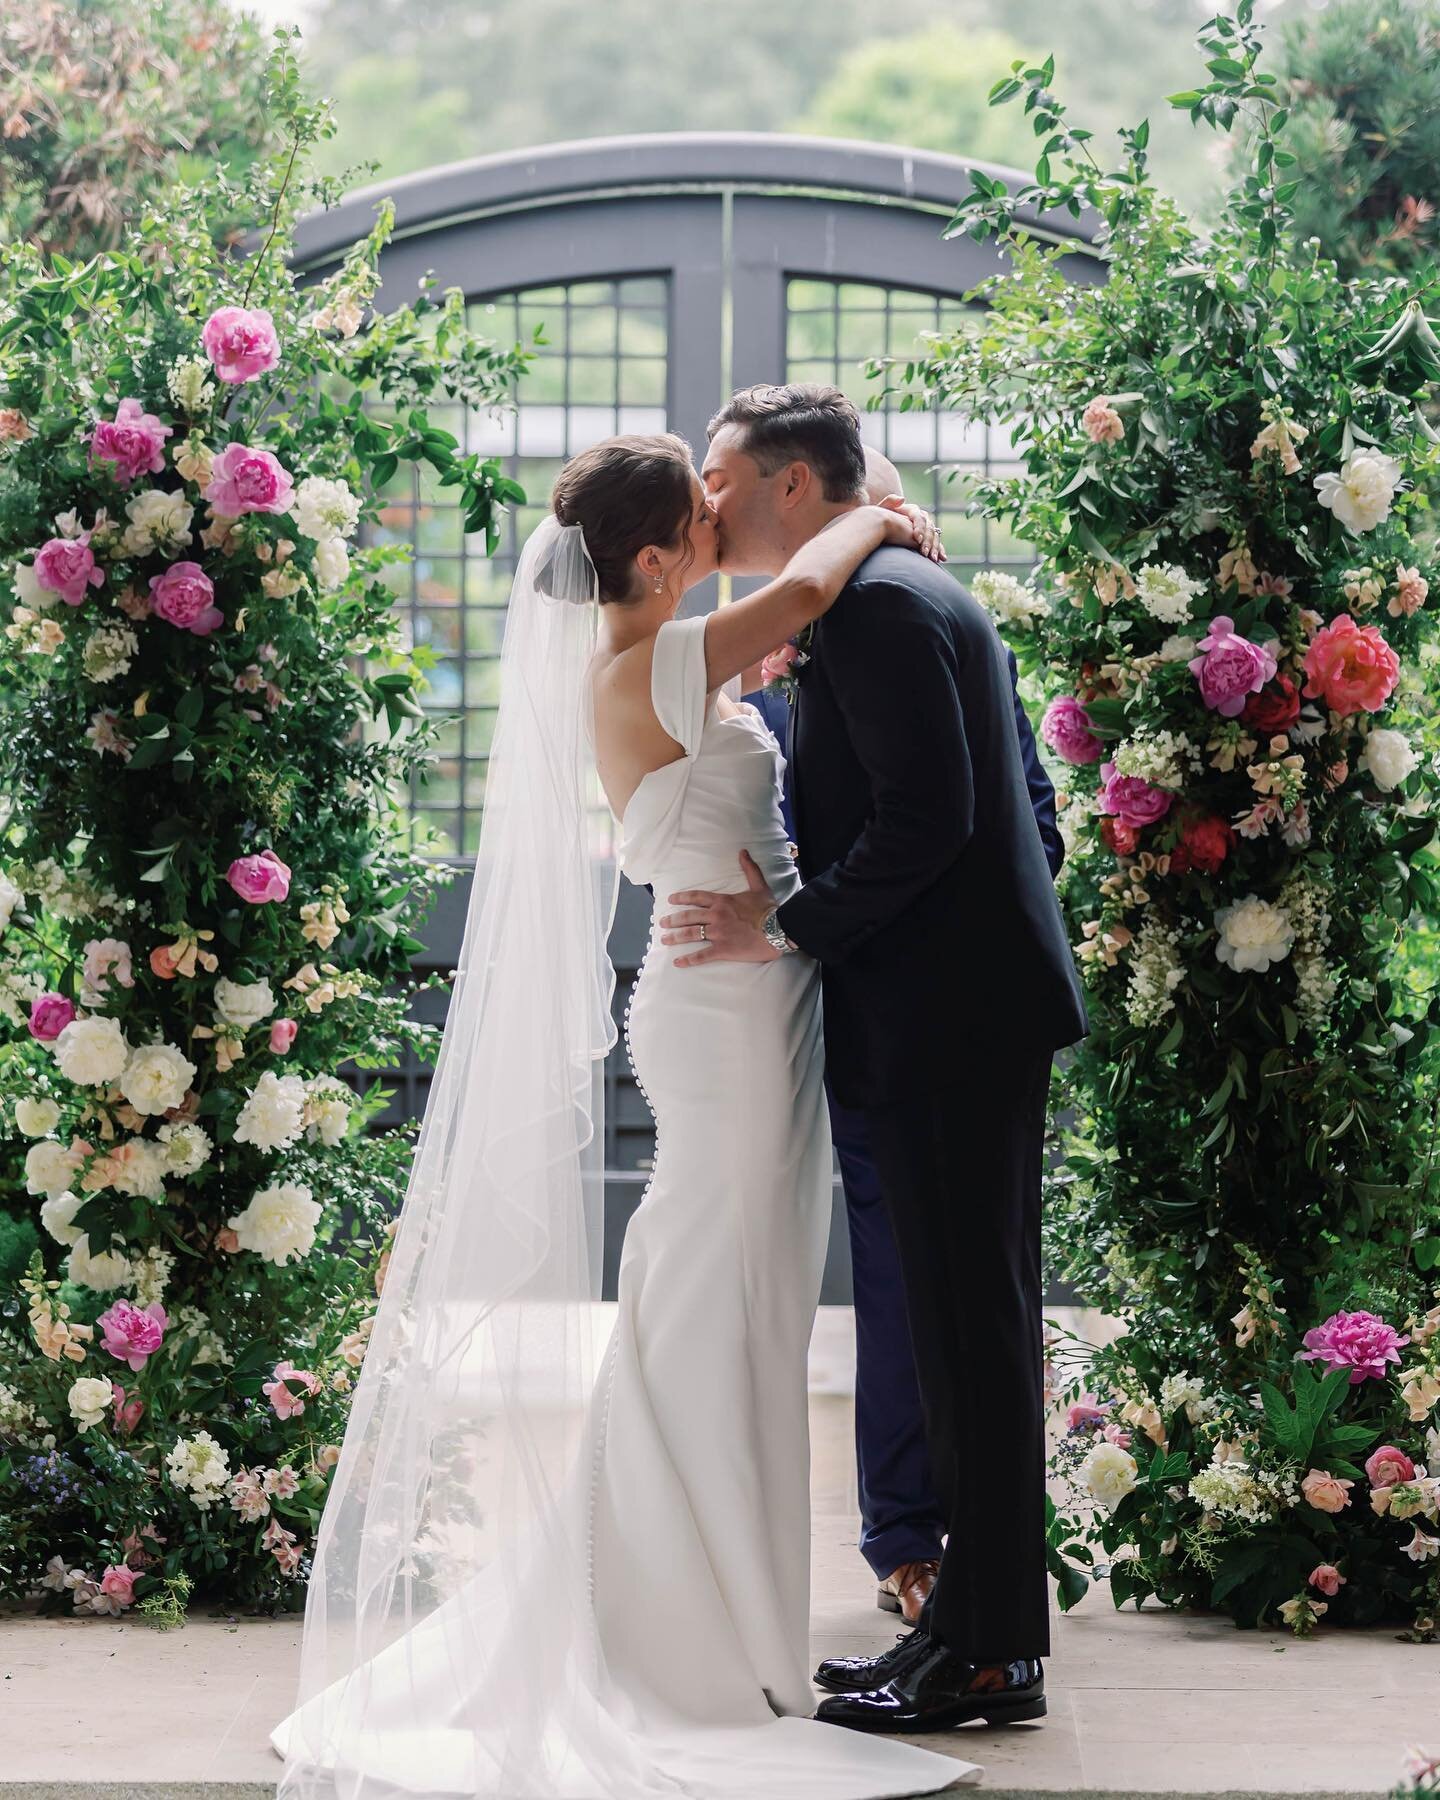 Congratulations to Julia &amp; Keenan! It was such a pleasure to bring her vision to life with such a fabulous vendor team. I will never tire of a colorful garden party wedding 🌷🪻🦋

Planning @theblushingdove @piperandmuse 
Photography @brandypalac